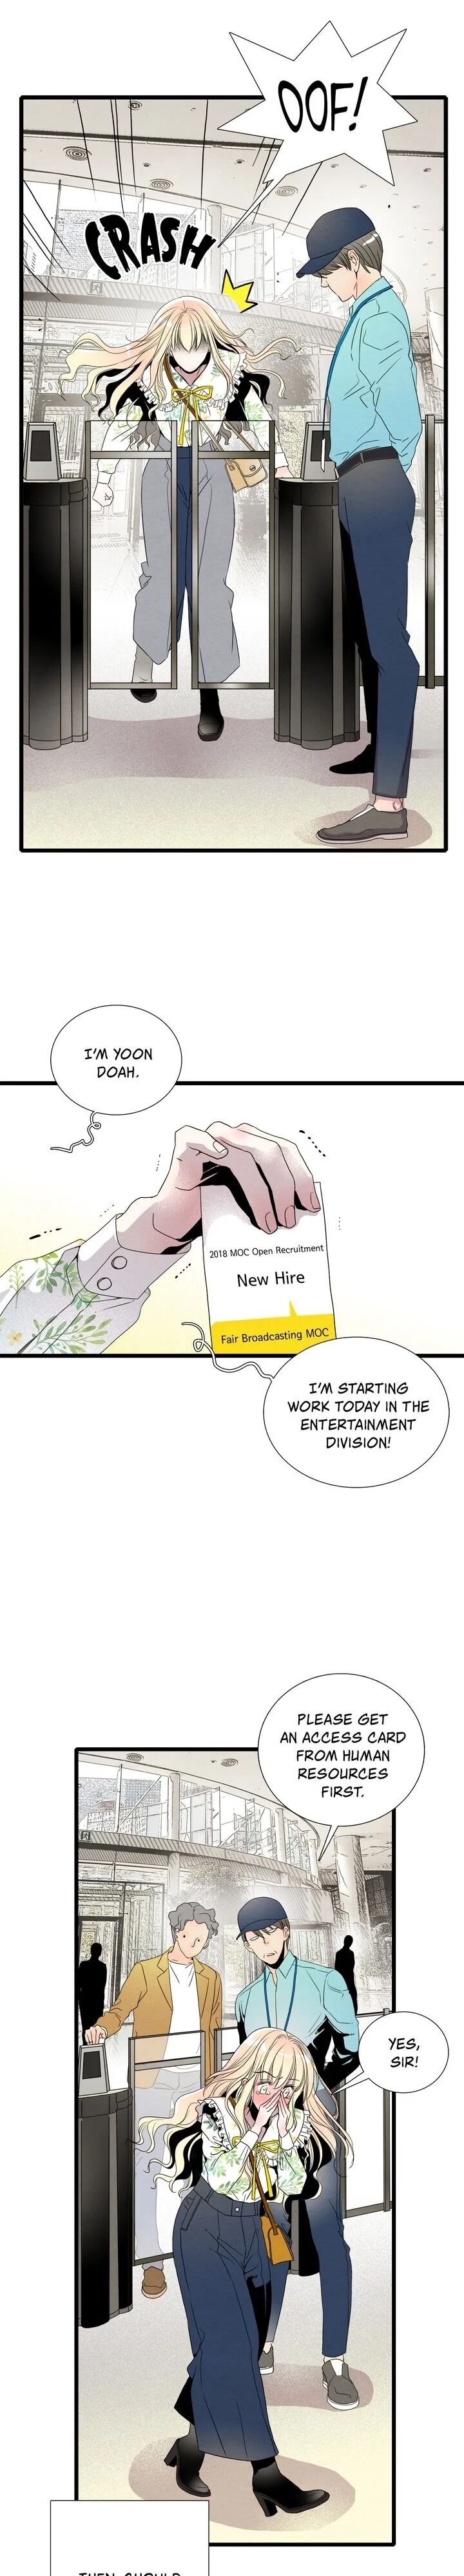 Time Share House - Chapter 2 Page 4